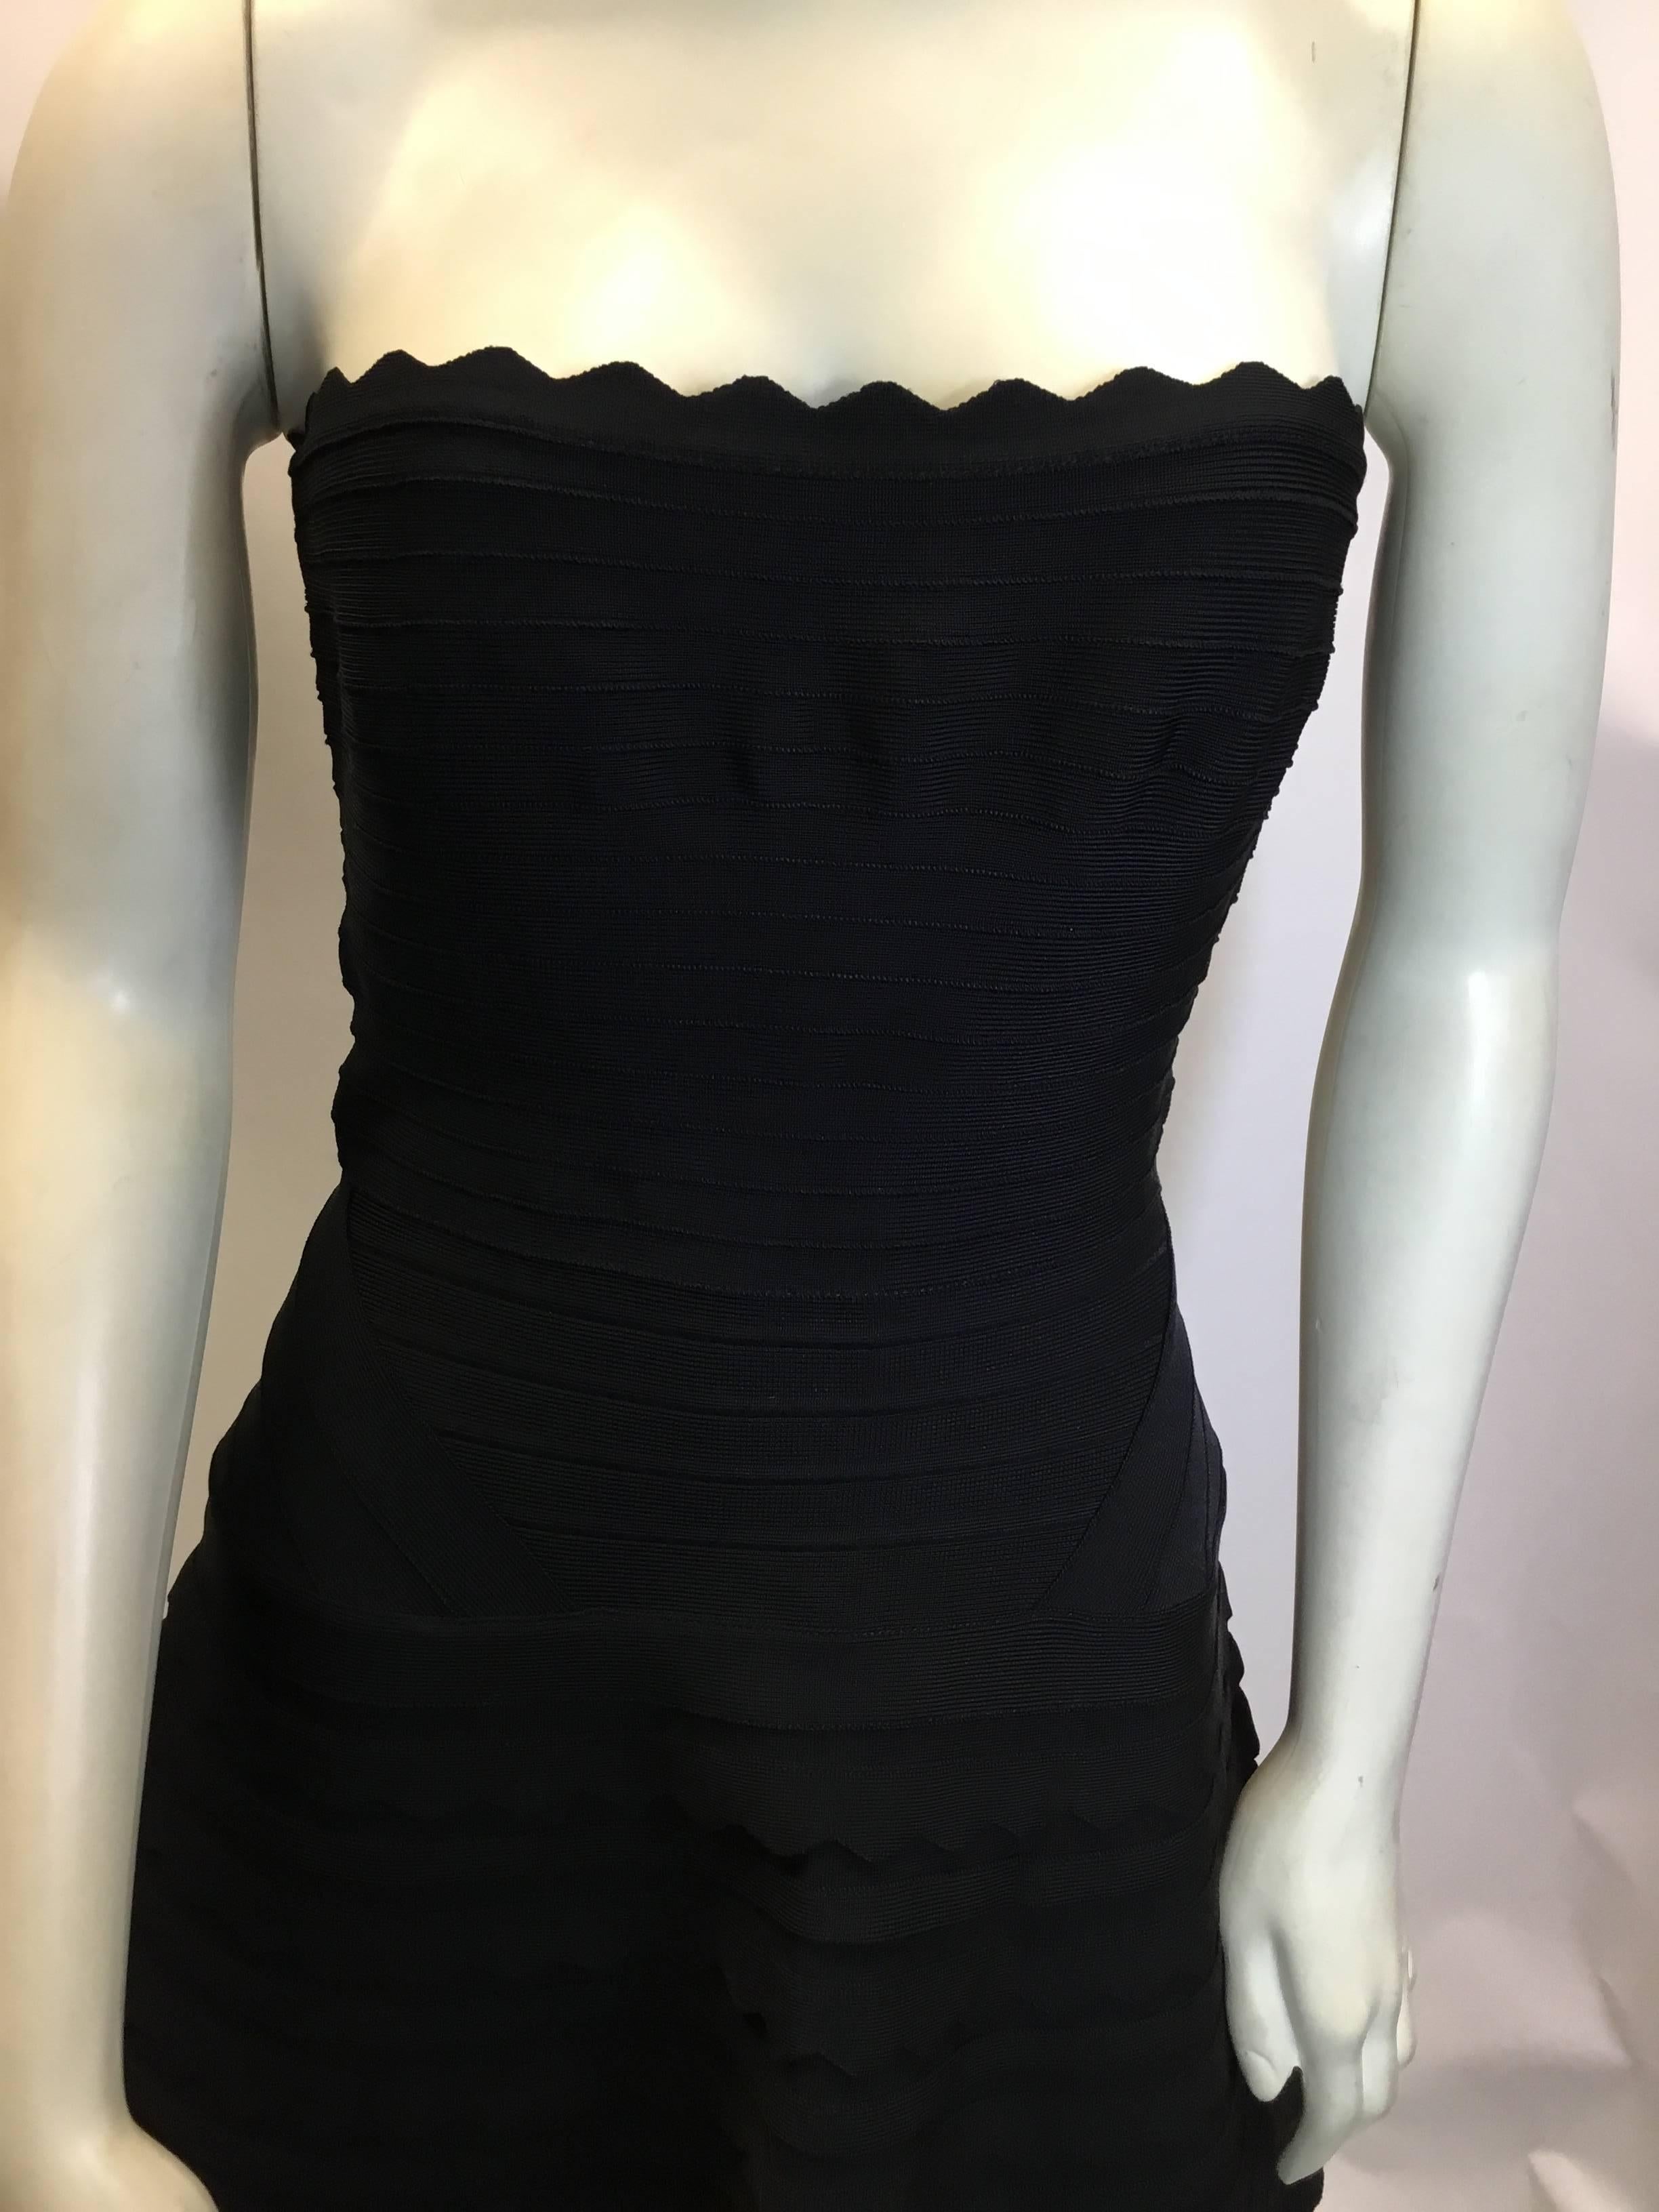 Herve Leger Black Strapless Scalloped Dress
Flared style
Size Medium
$499
Made in China